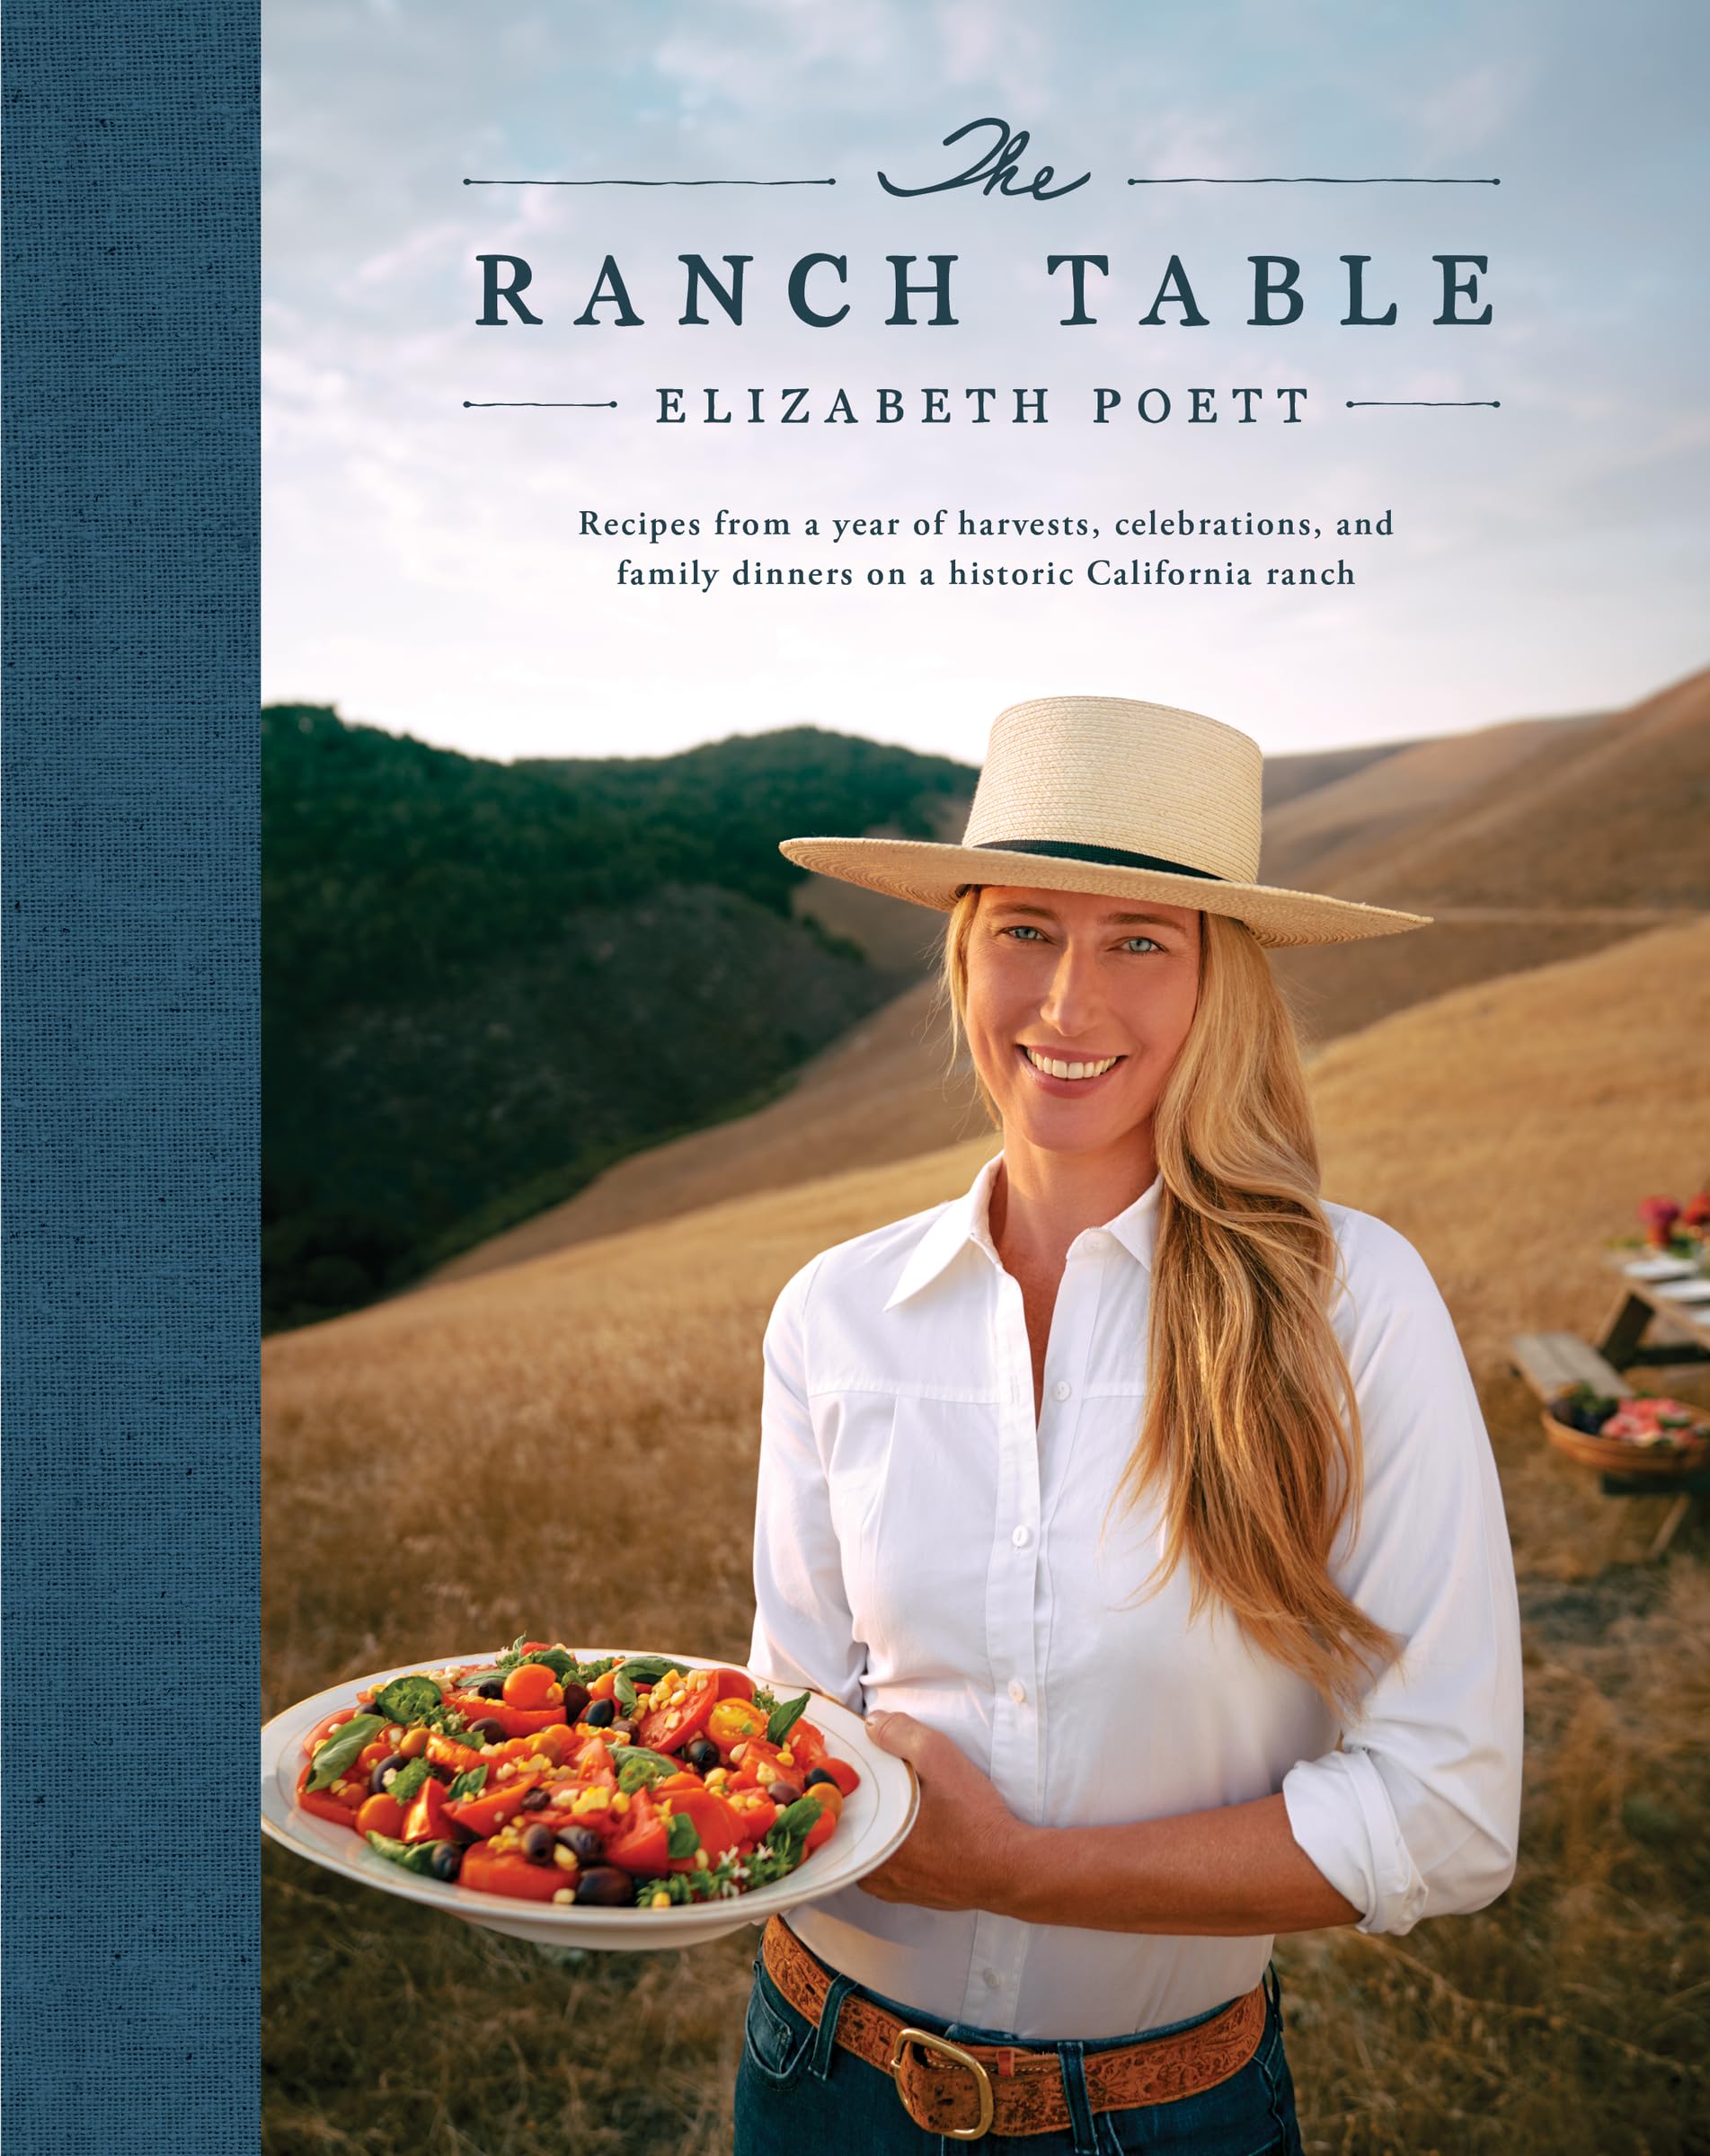 The Ranch Table: Recipes from a Year of Harvests, Celebrations, and Family Dinners on a Historic California Ranch (Elizabeth Poett, Georgia Freedman) *Signed*